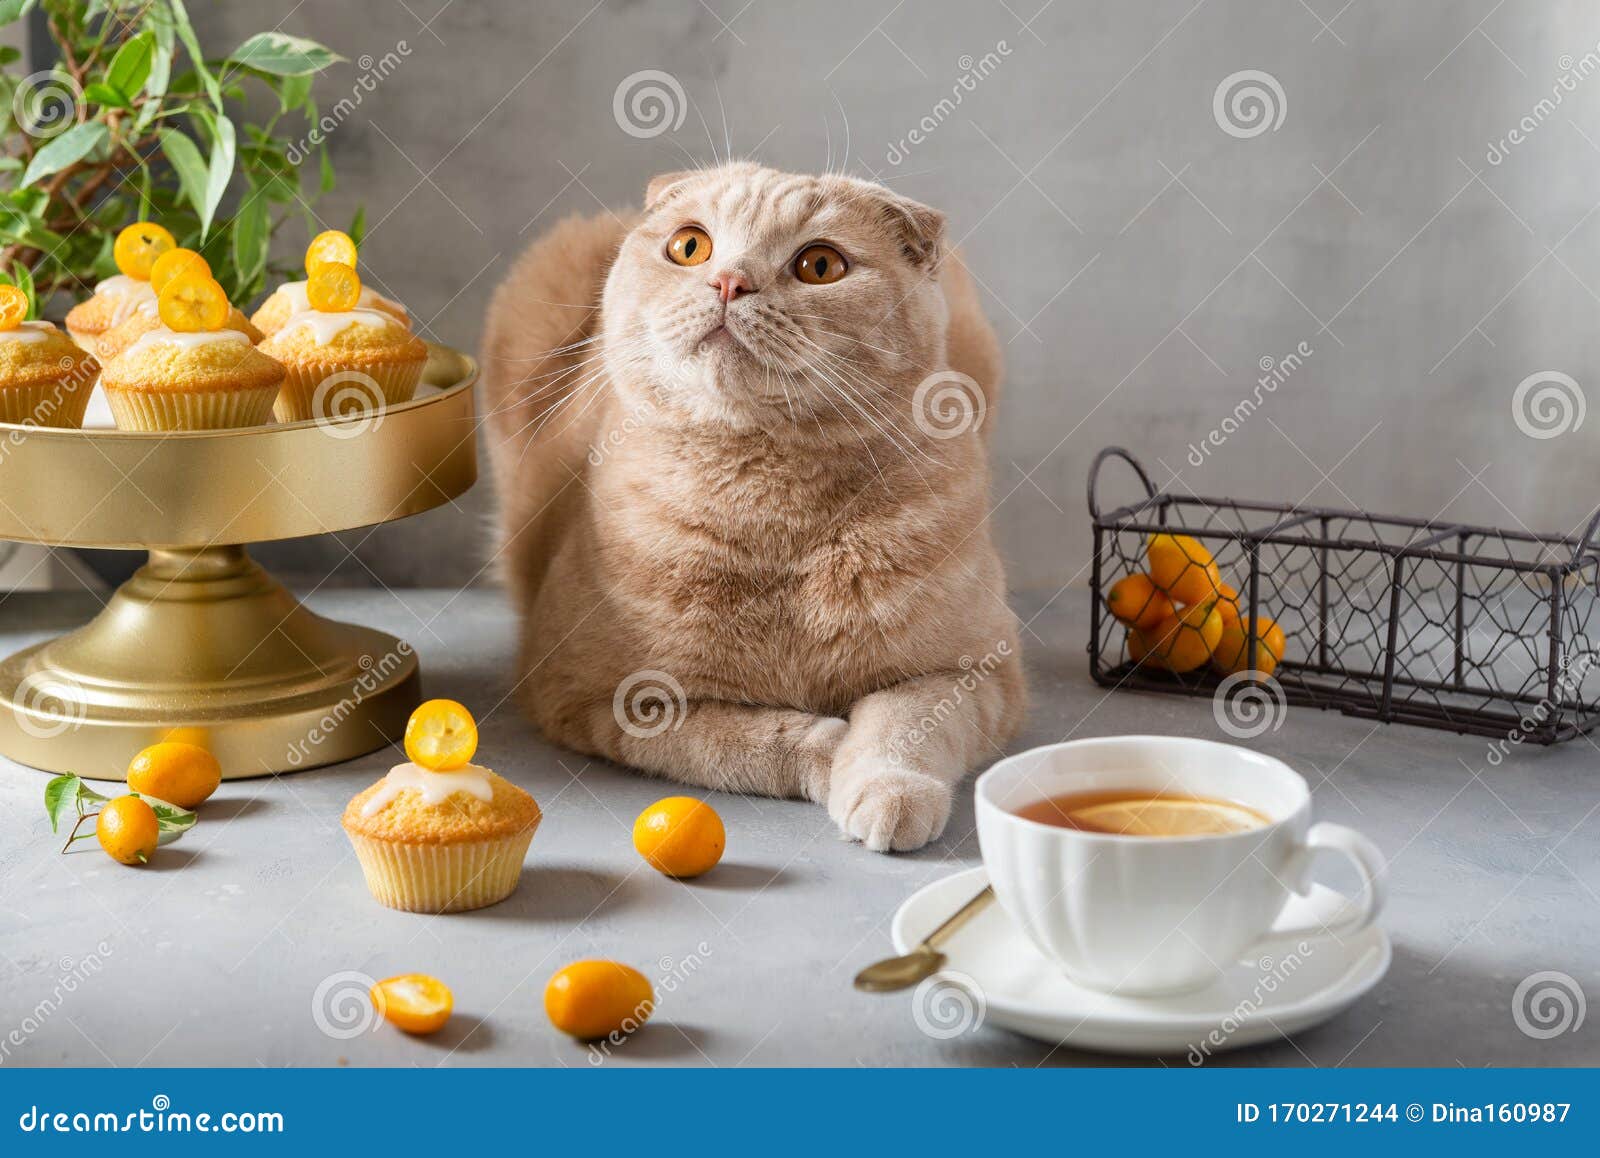 Funny Cat  With A Cup Of Tea And Muffins Cute  Cat  Poster 